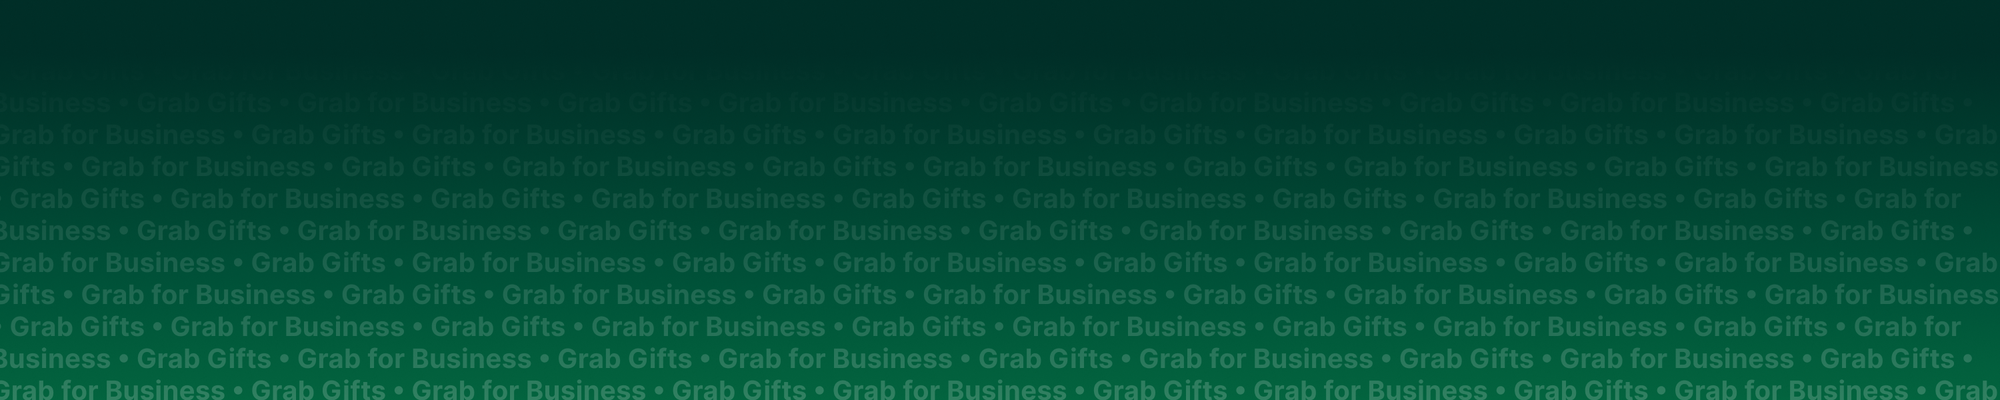 Grab for Business (GFB)